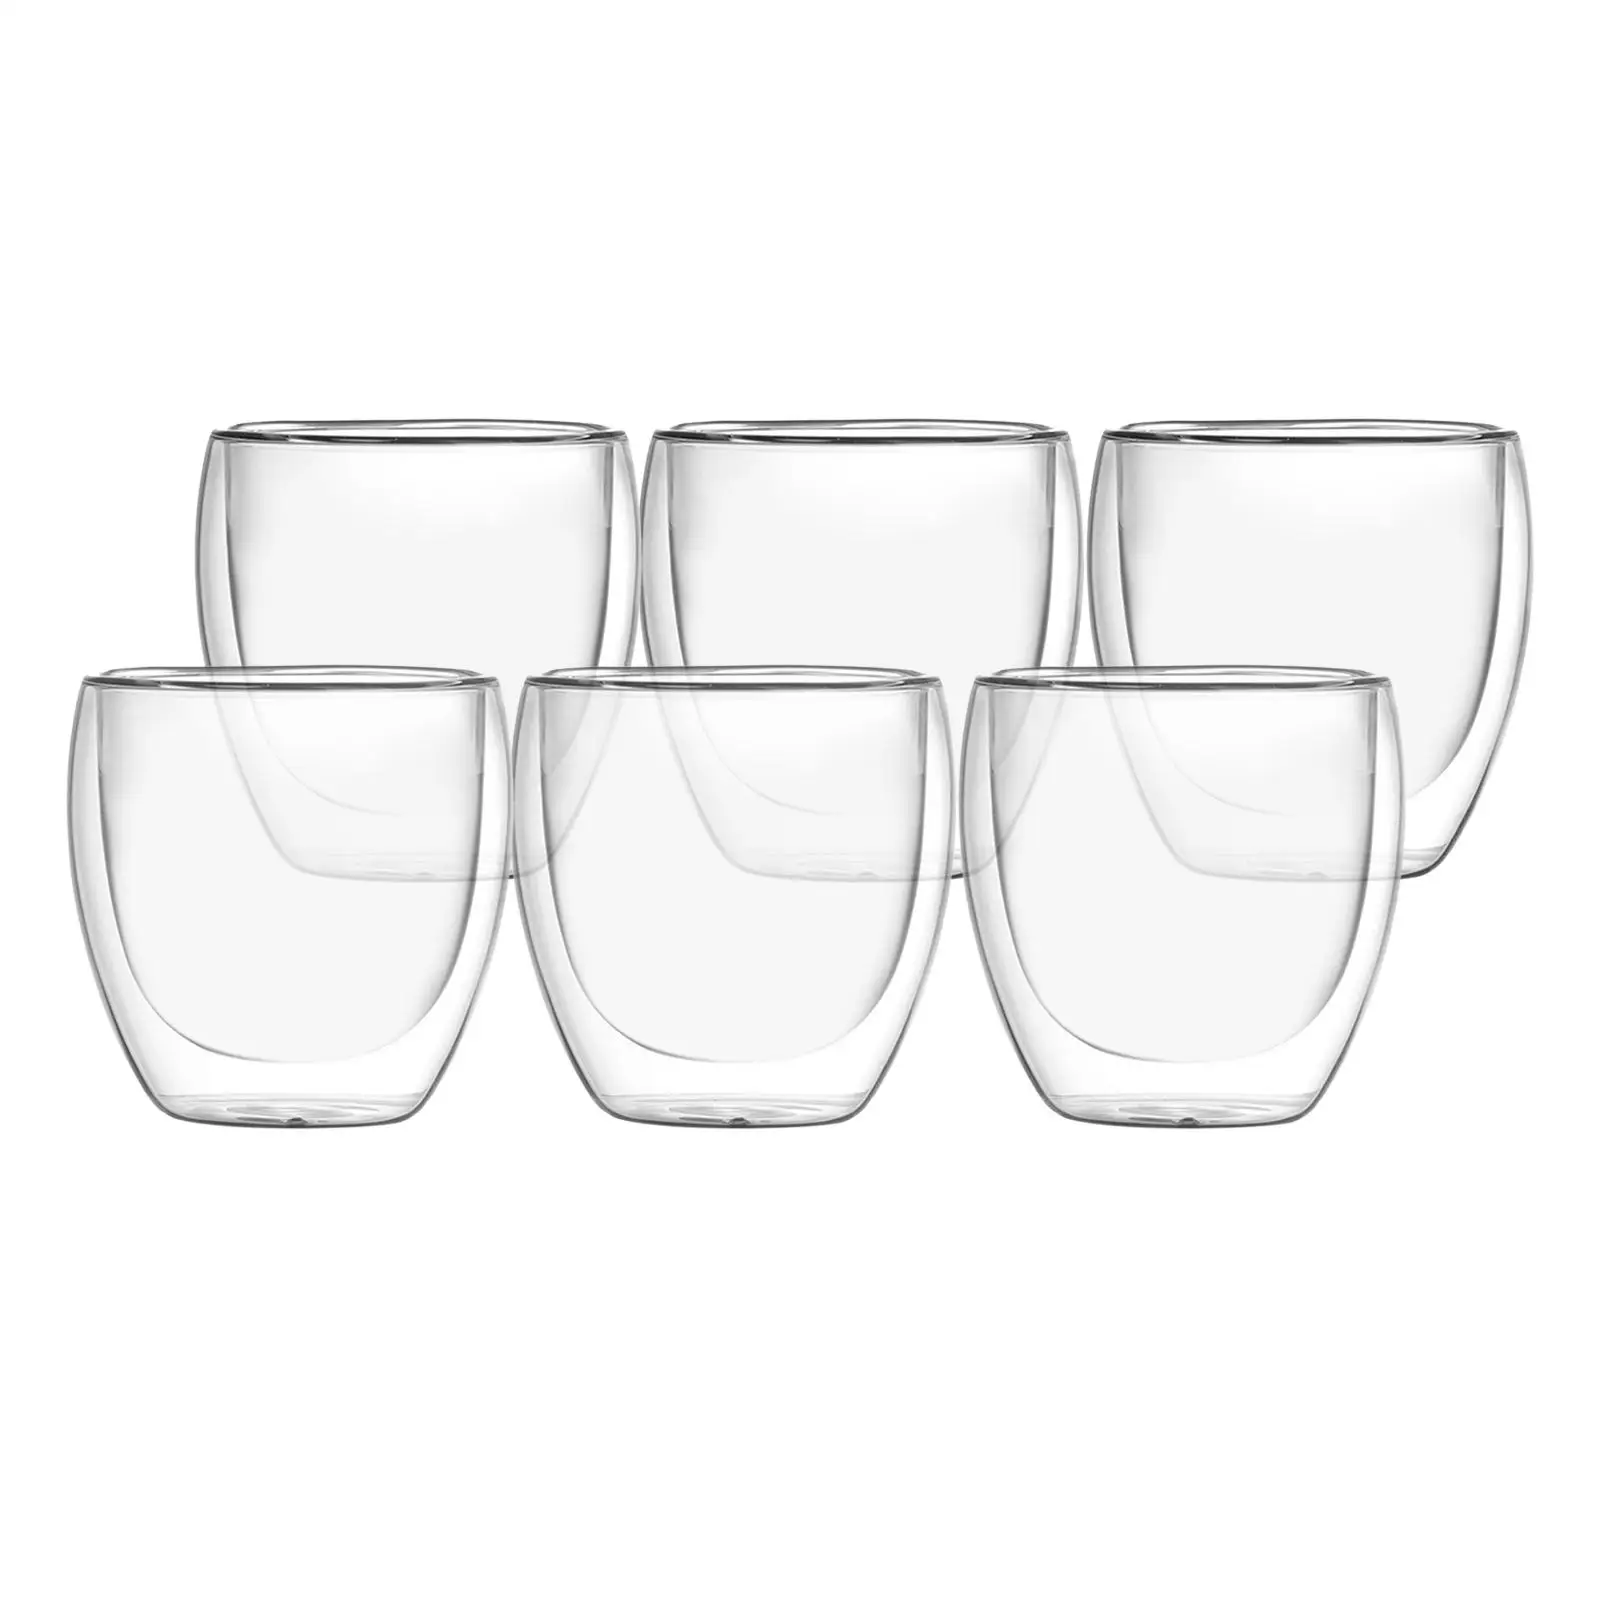 6x Double wall Coffee Cups 80ml Clear Insulated Drinking Glasses Mugs for Tea Beverage Coffee Cappuccinos Latte